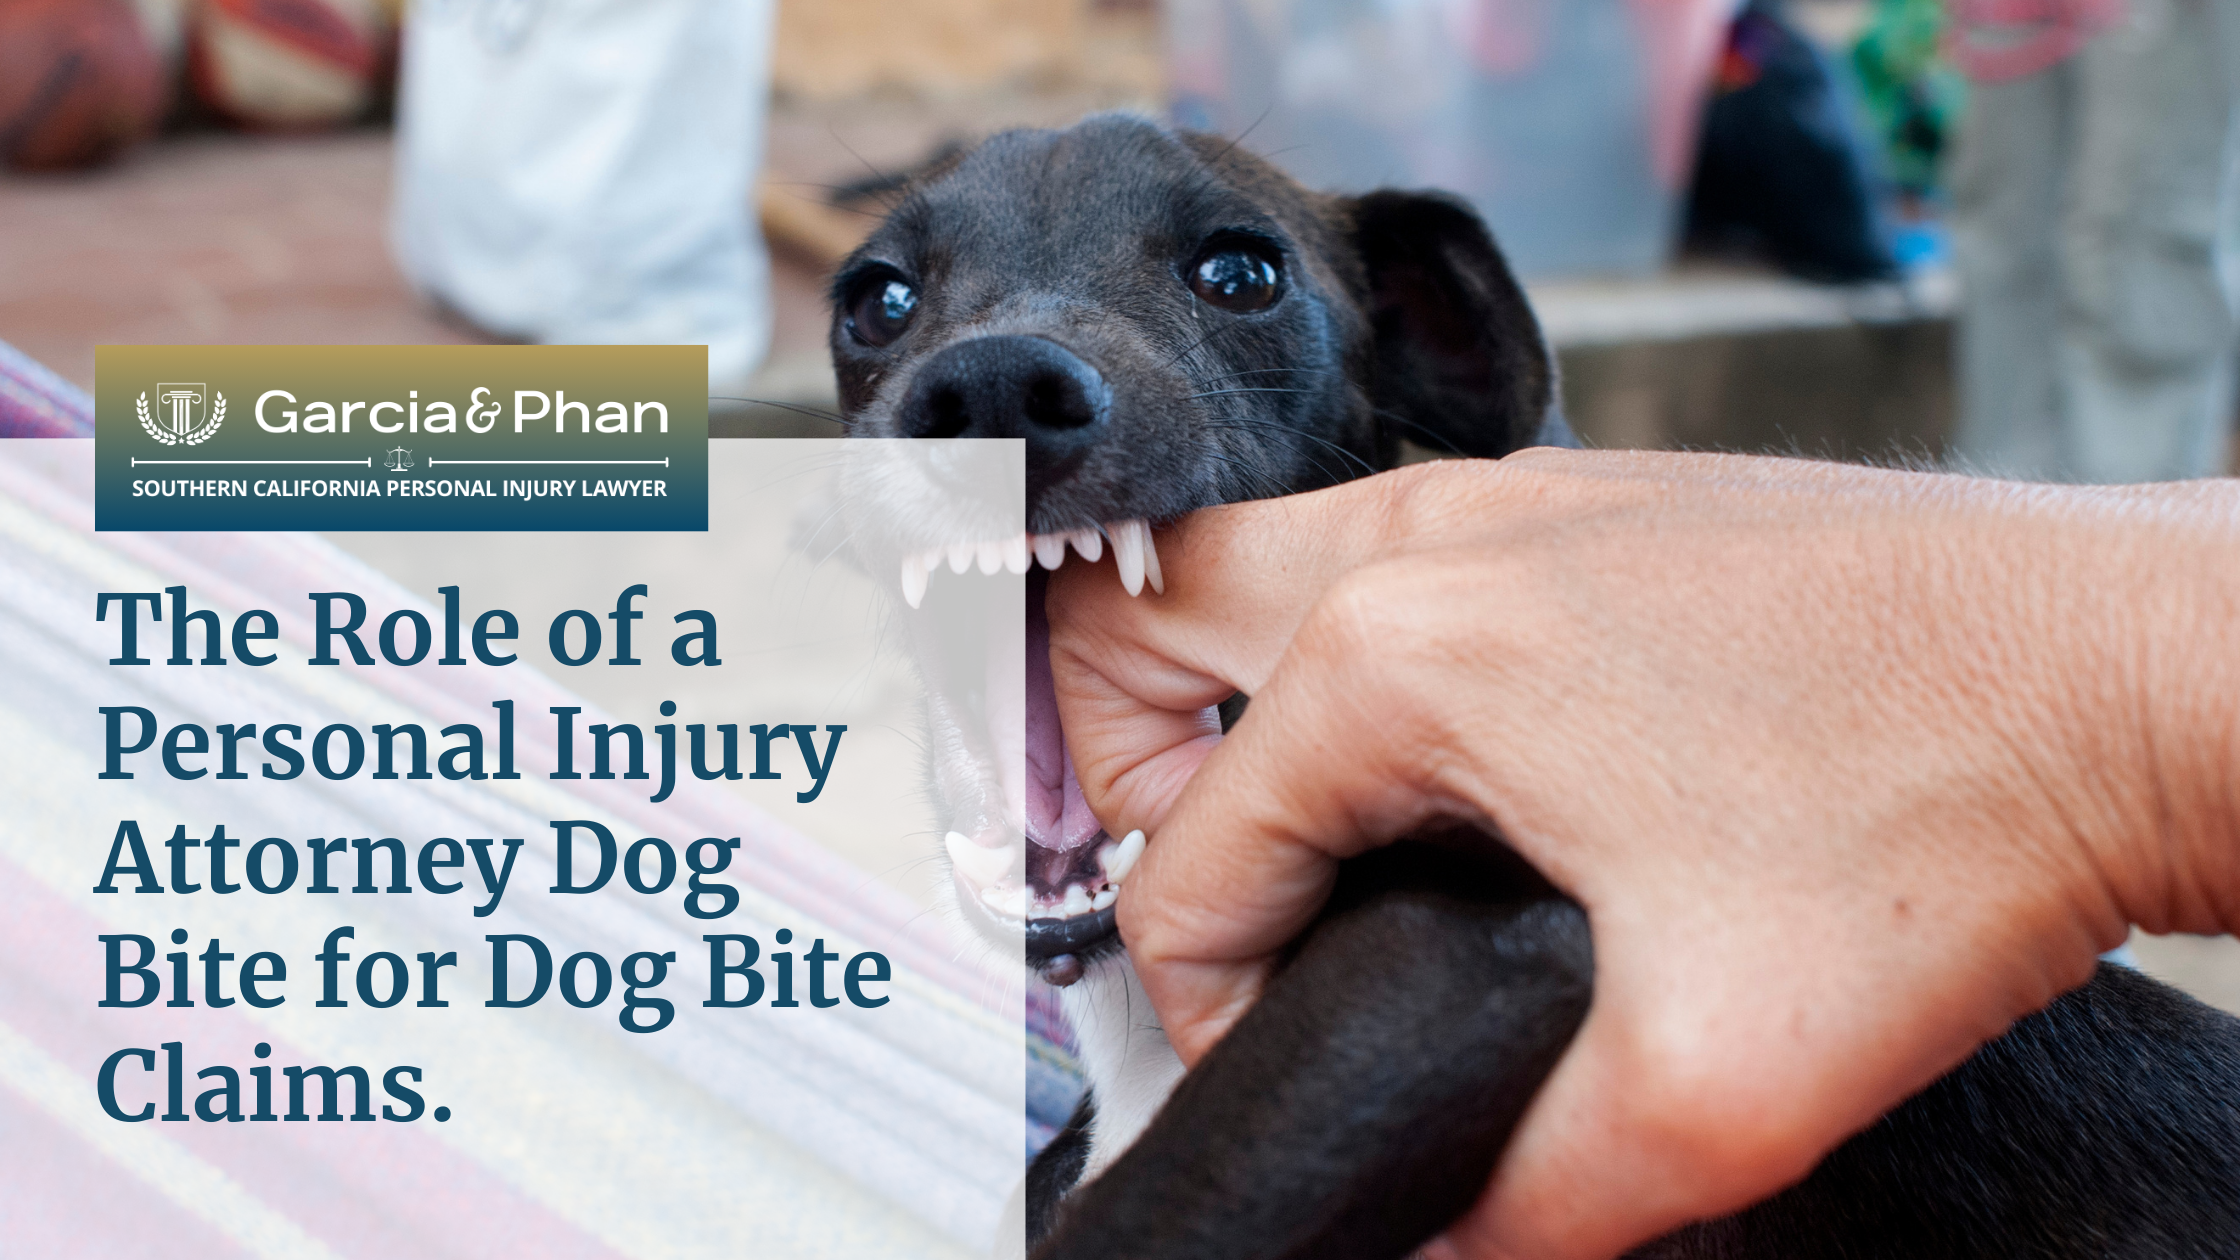 The Role of a Personal Injury Attorney Dog Bite for Dog Bite Claims. | GP